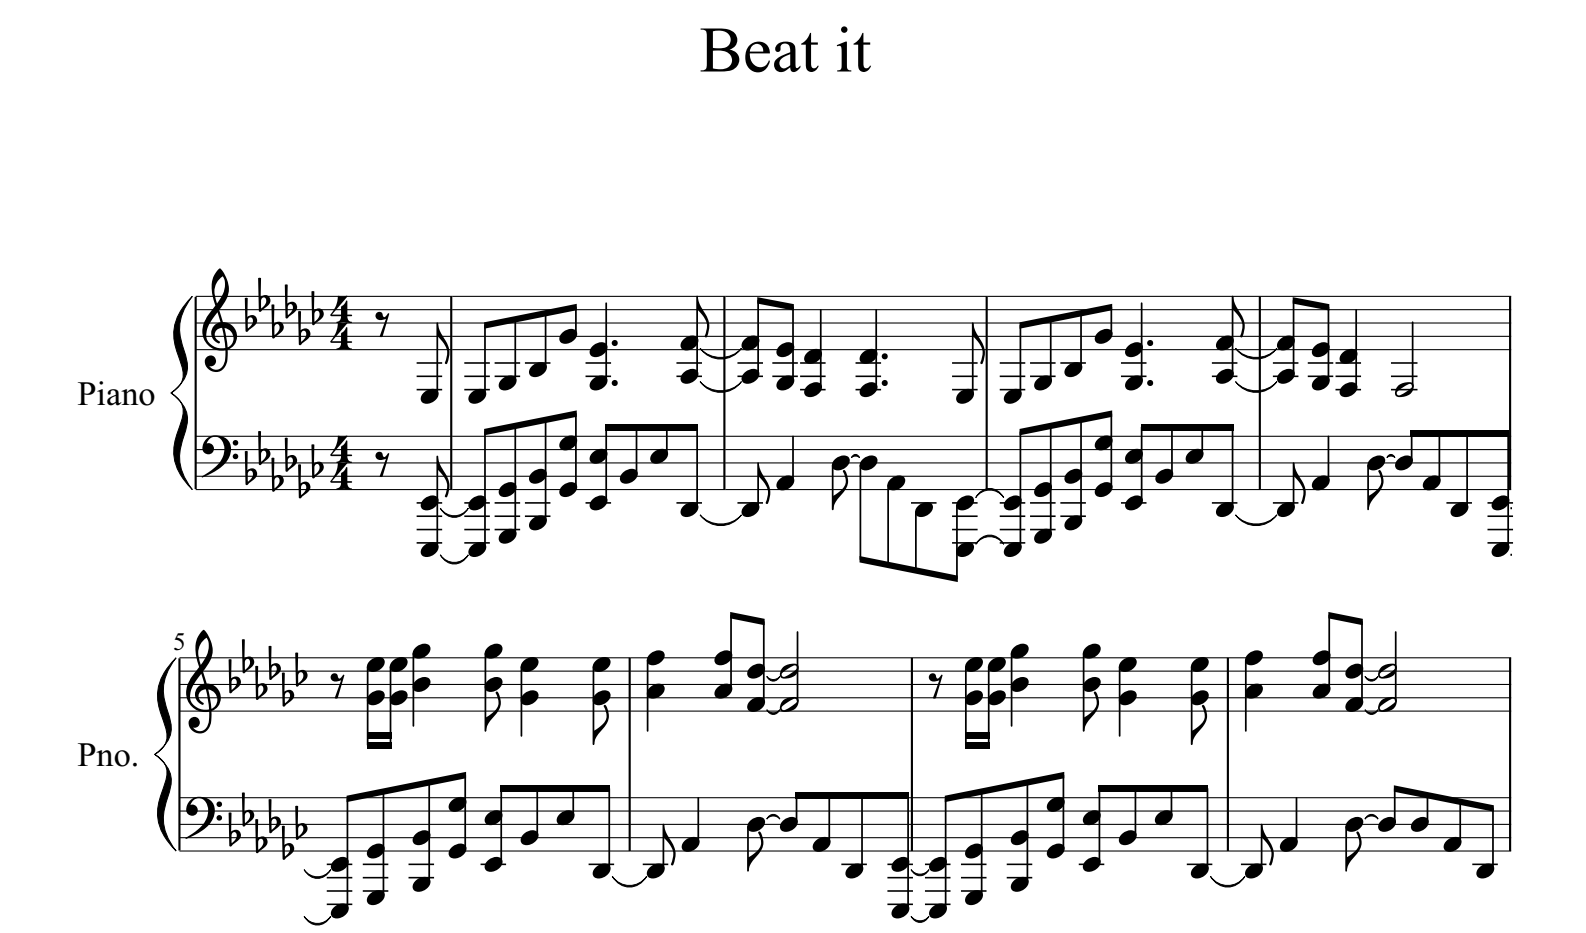 Beat It for piano. music and midi files for piano.